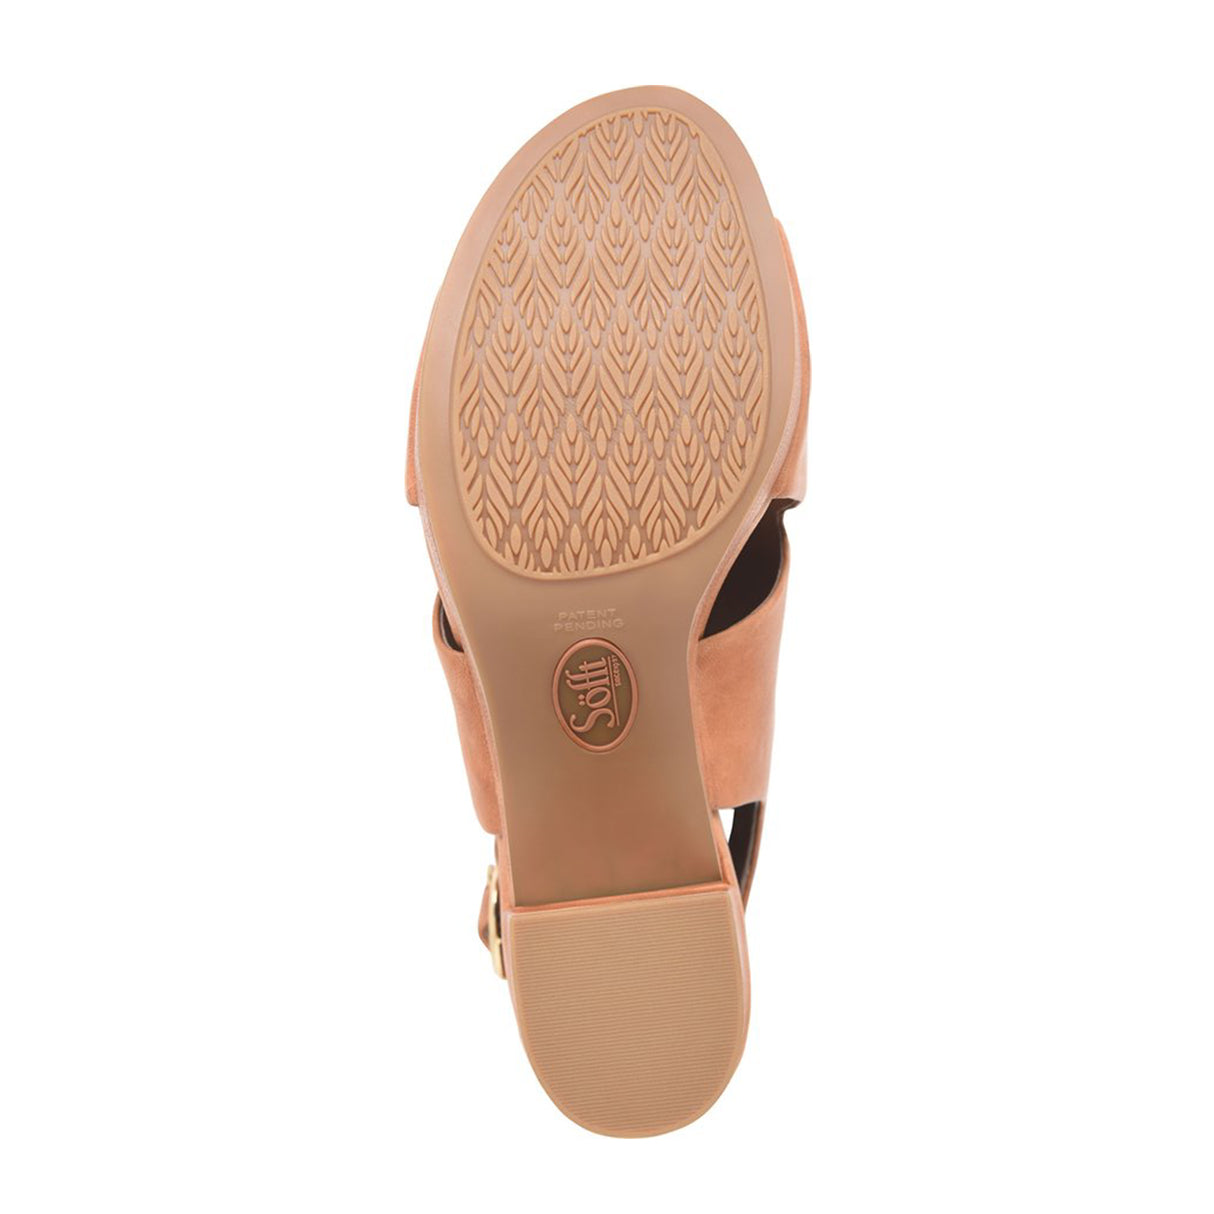 Sofft Liv Heeled Sandal (Women) - Luggage Sandals - Heel/Wedge - The Heel Shoe Fitters